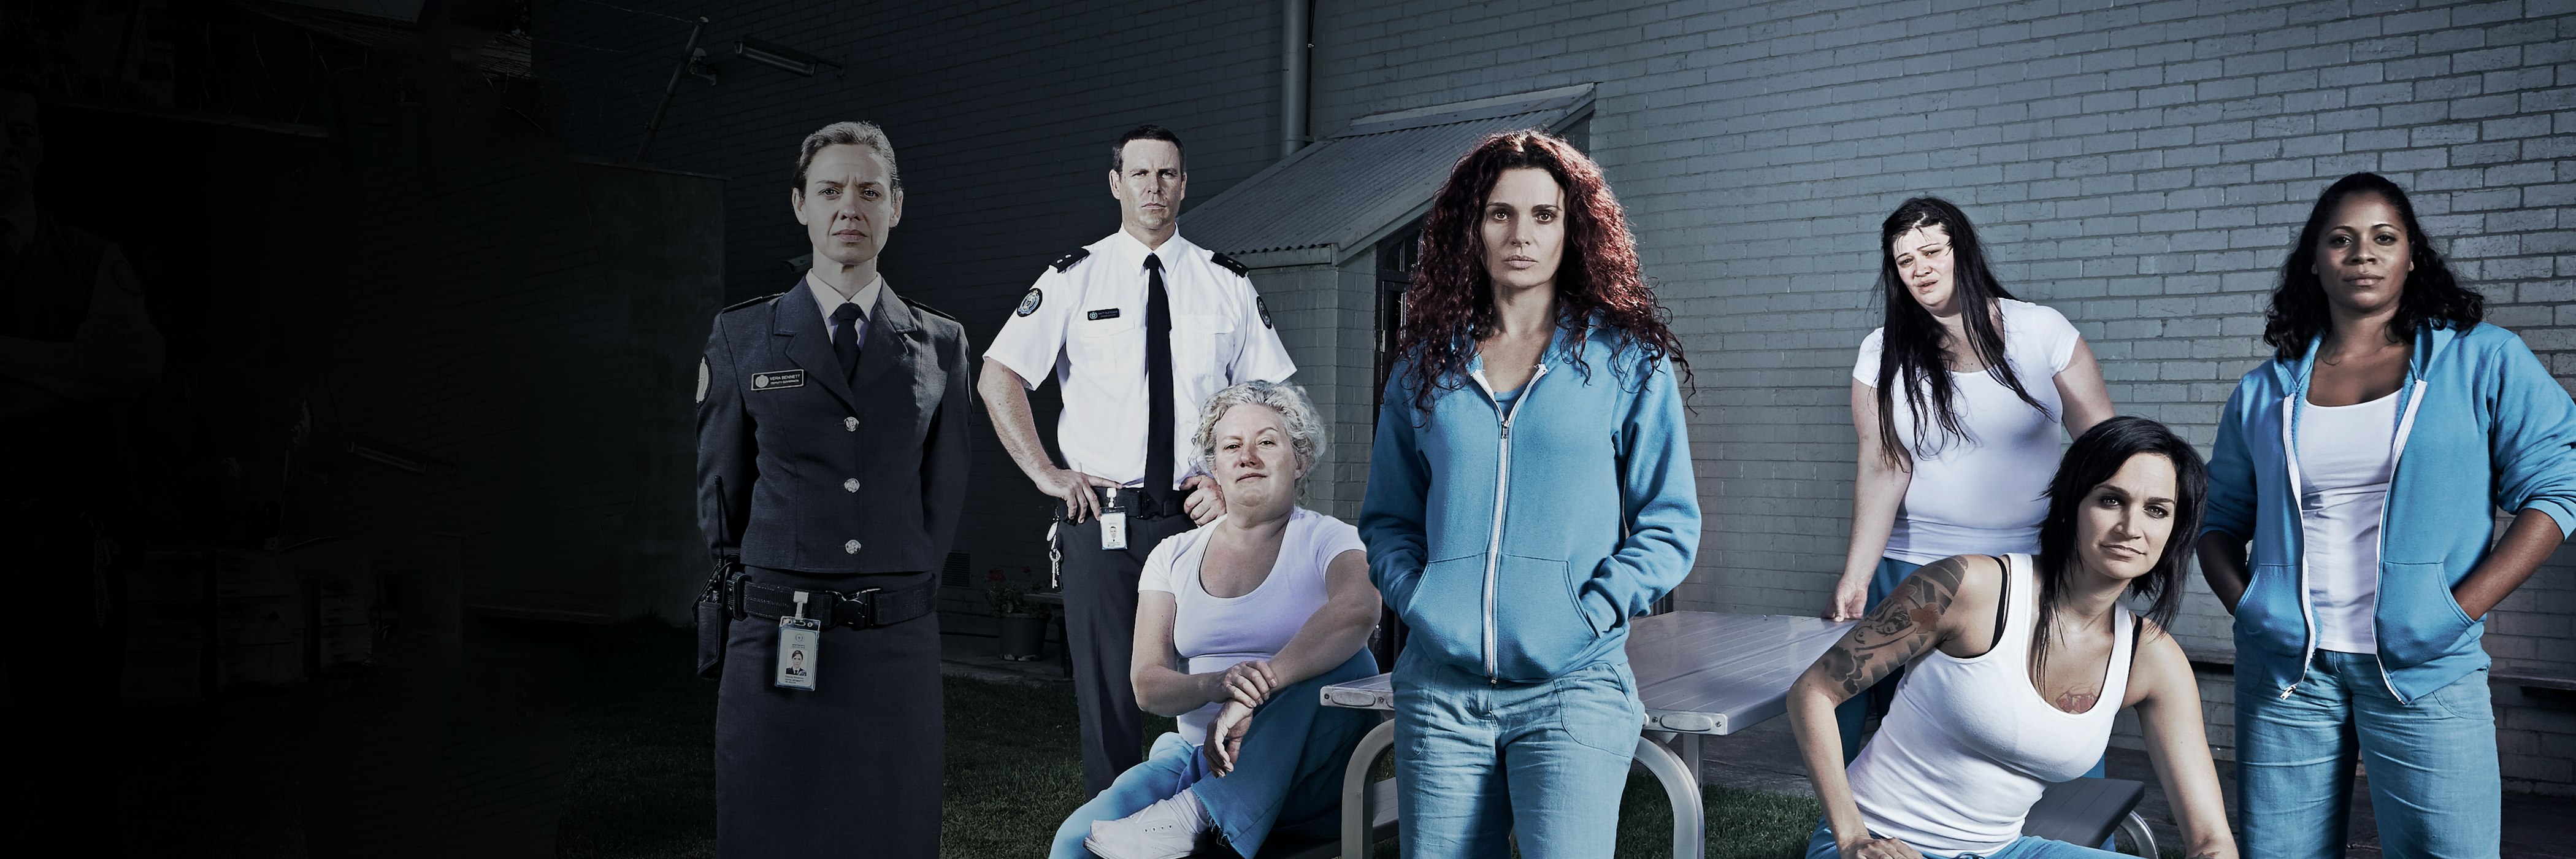 Wentworth: Season 4 (Episode 10 Preview) - YouTube